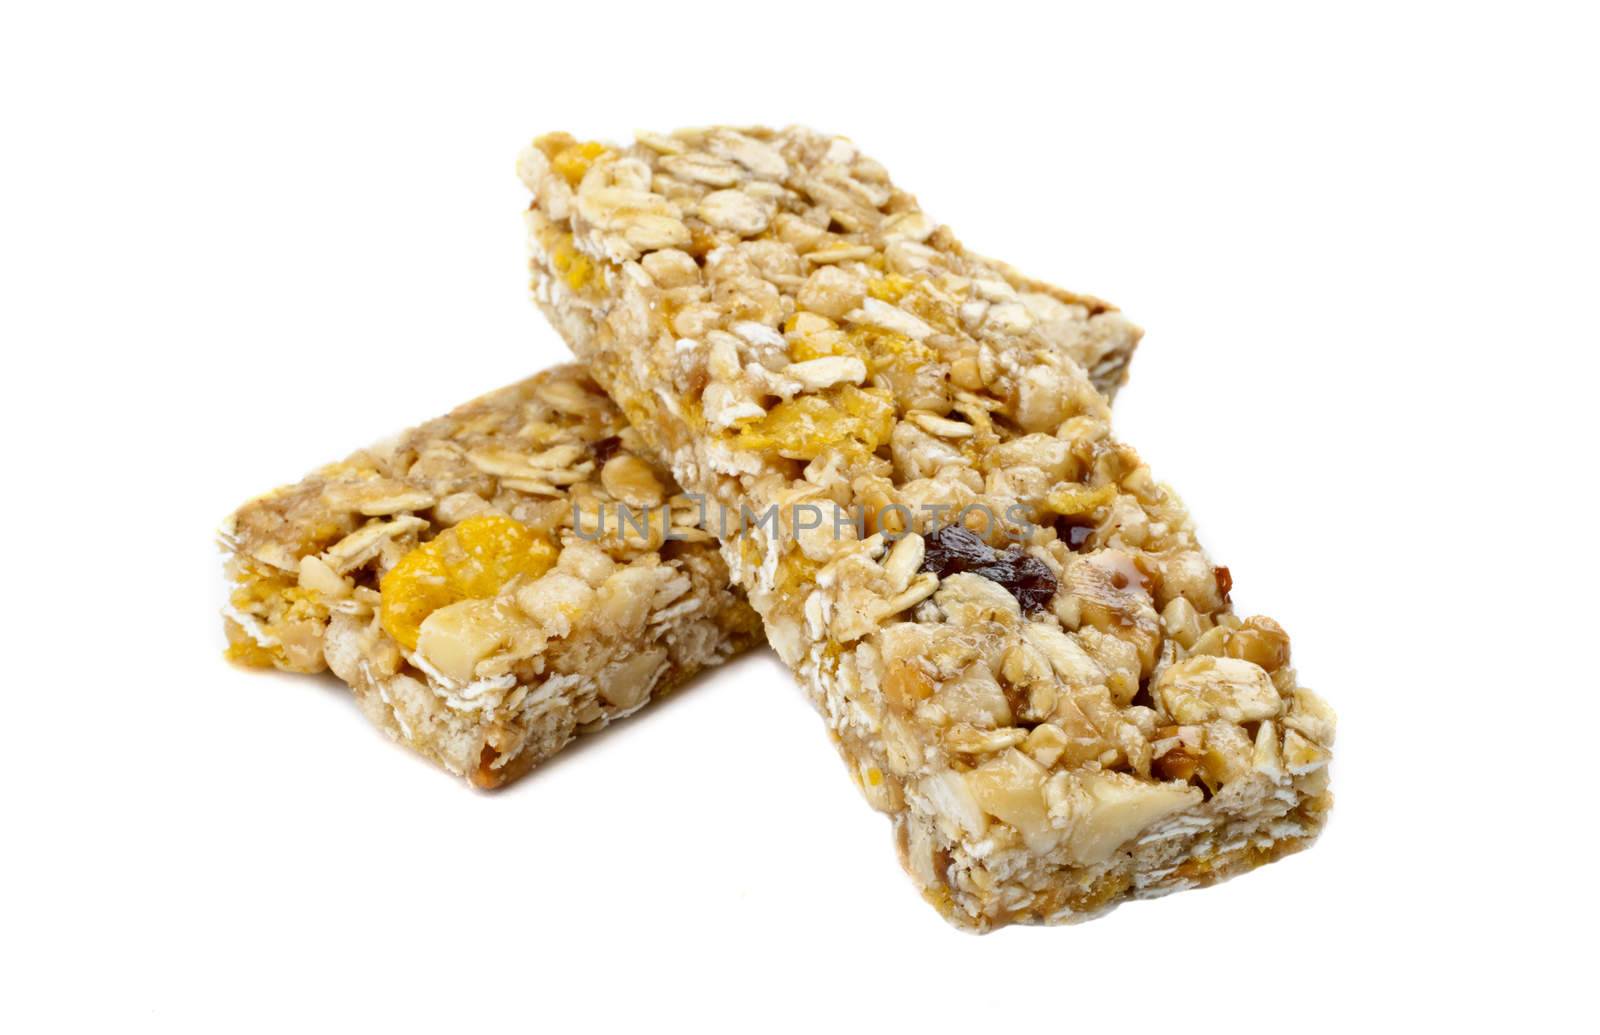 Cereal Bars over a white background.